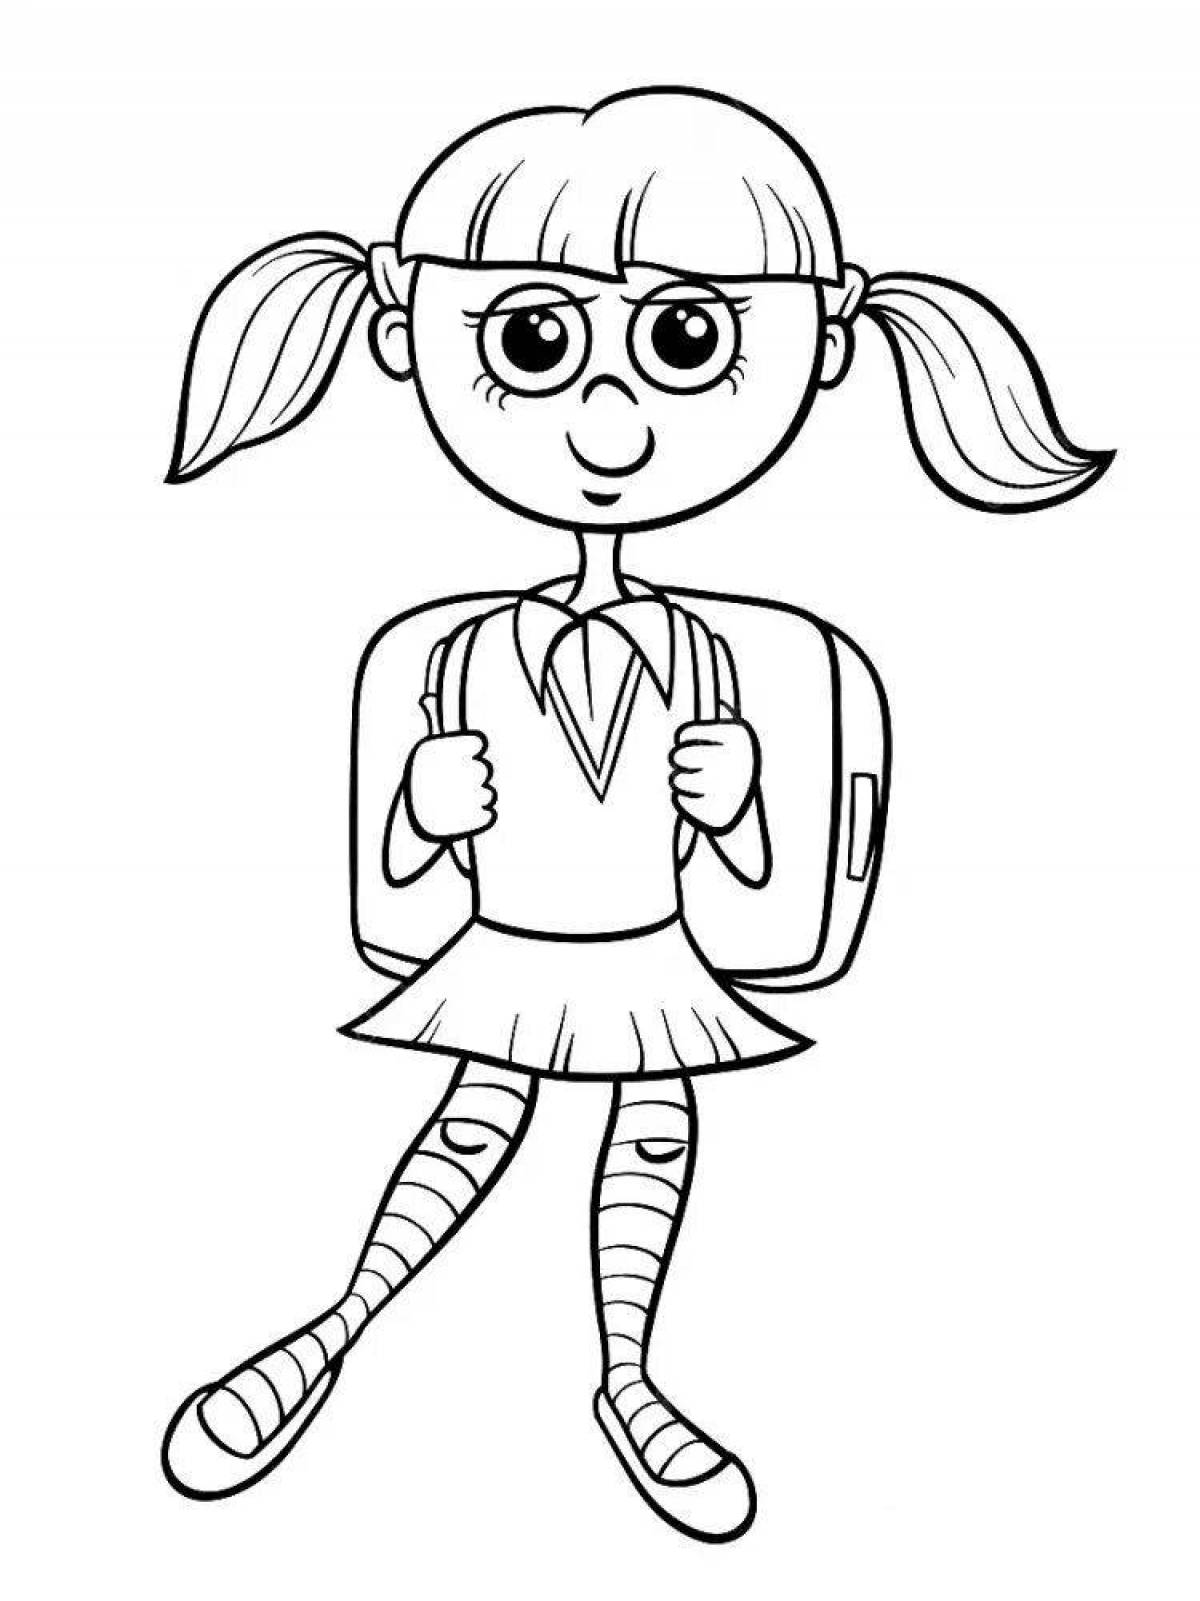 Coloring page playful schoolgirl